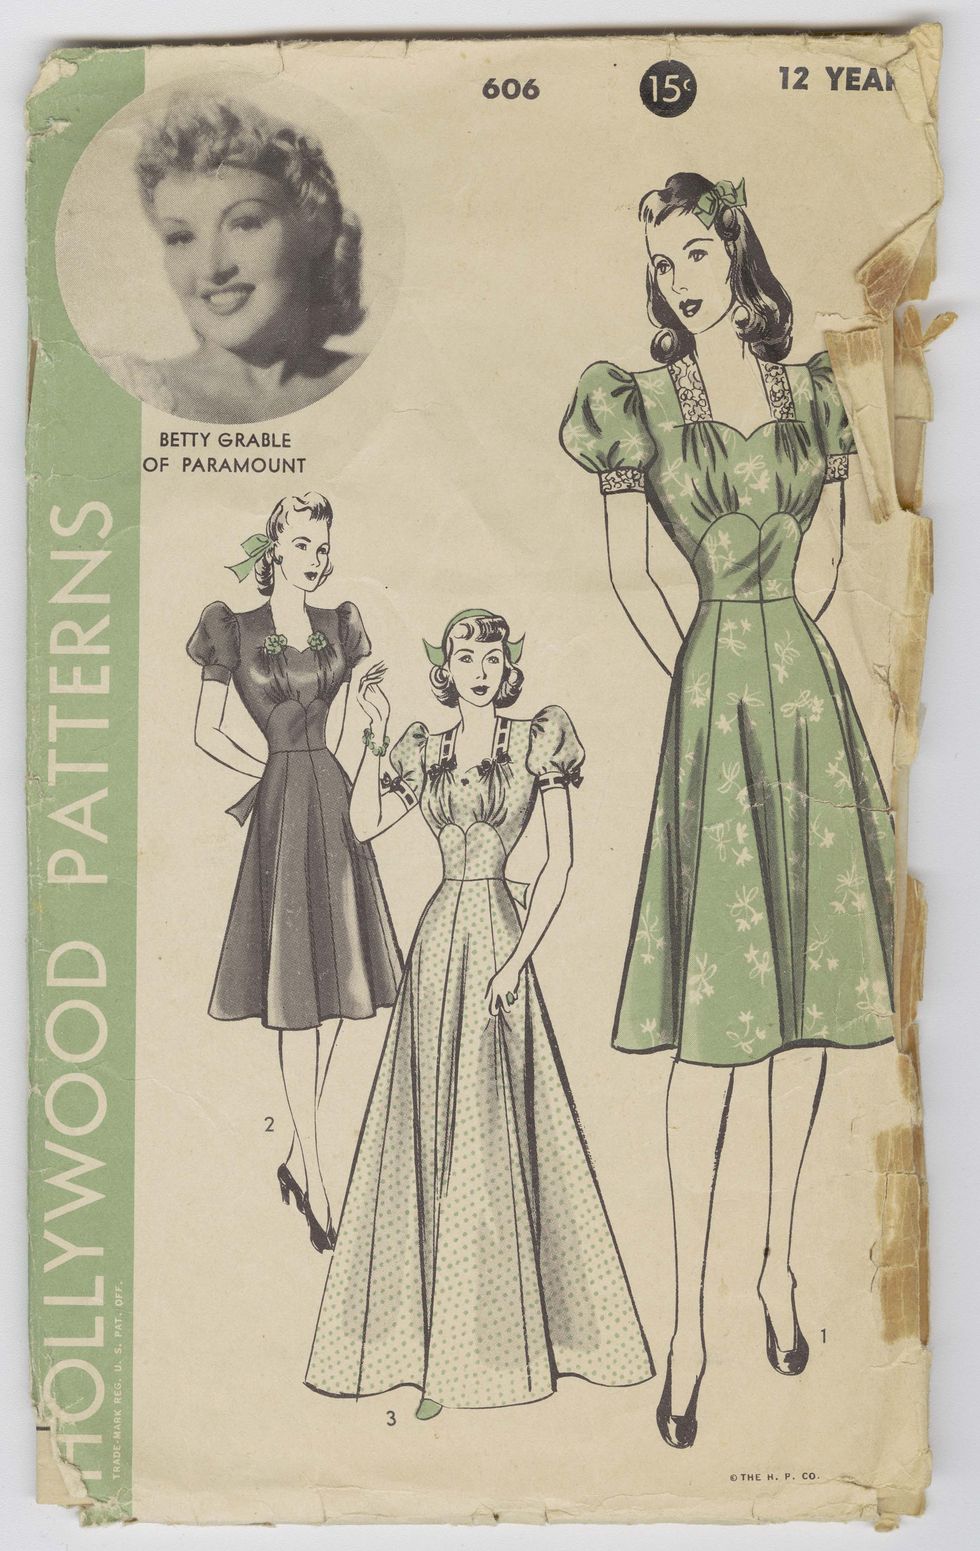 The 1930s / 1940s Movie Stars & Fashions of Hollywood Patterns